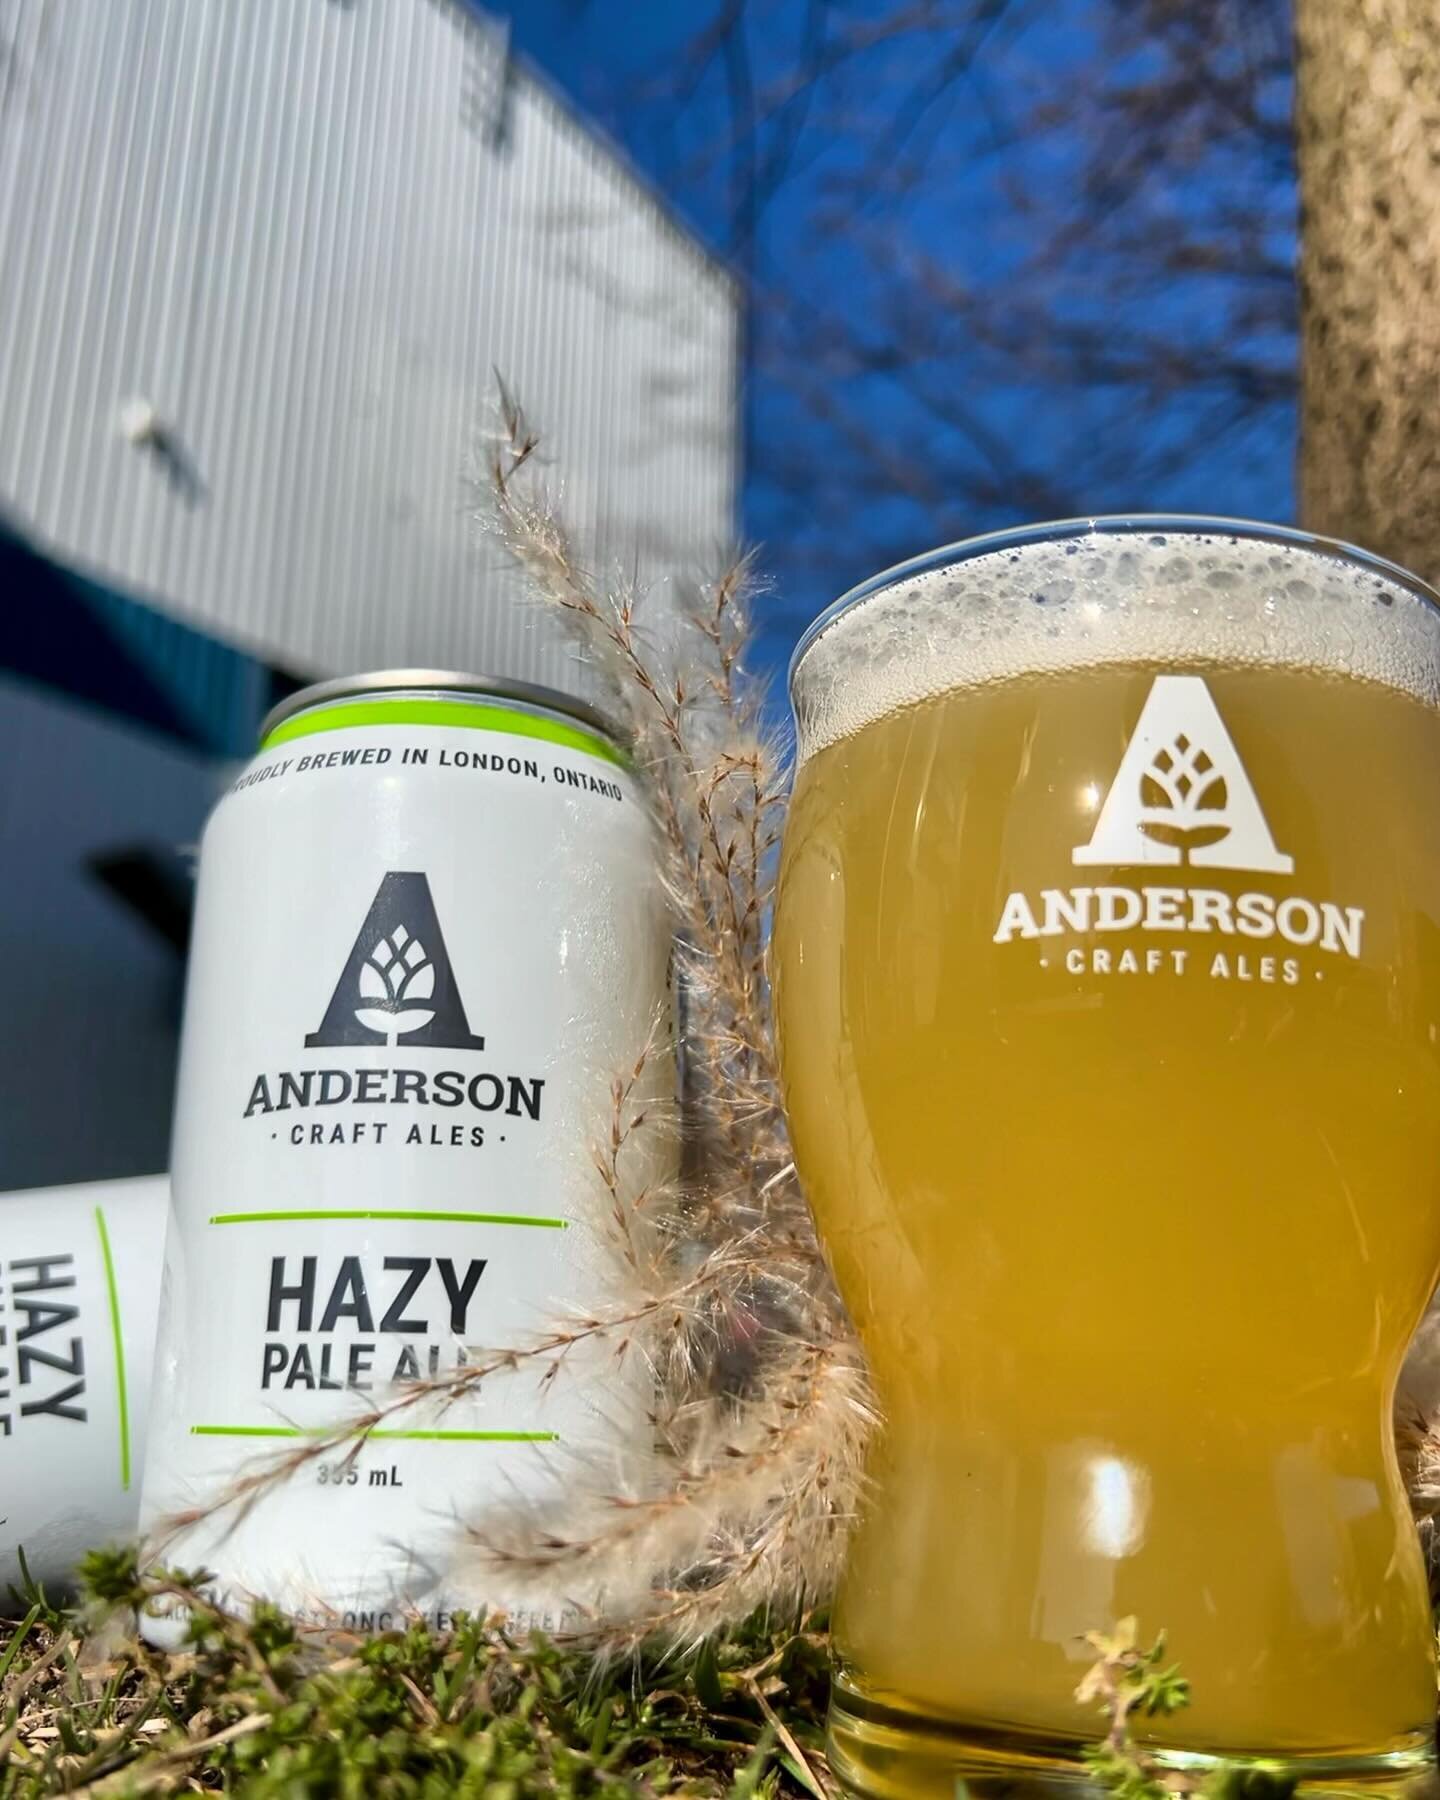 What a sunny day to come out and enjoy a beer. Patio season will soon be upon us if the weather keeps up! 

Enjoy our new spring drop! Our Hazy Pale Ale. 

Music from 1-4pm today. And catch us at the @iheartbeerca at RBC Place today!